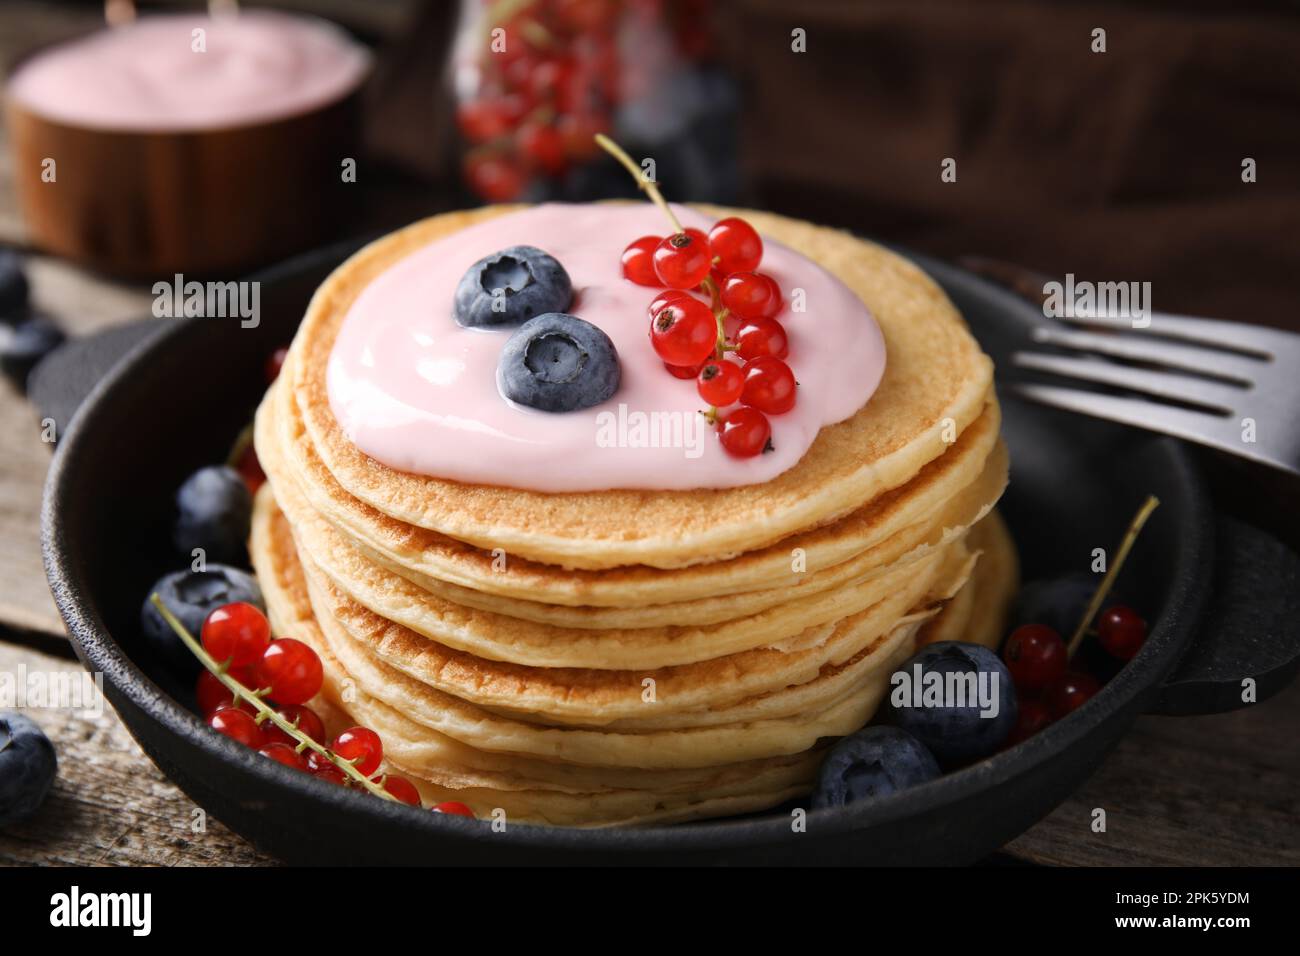 Tasty pancakes with natural yogurt, blueberries and red currants on wooden table, closeup Stock Photo